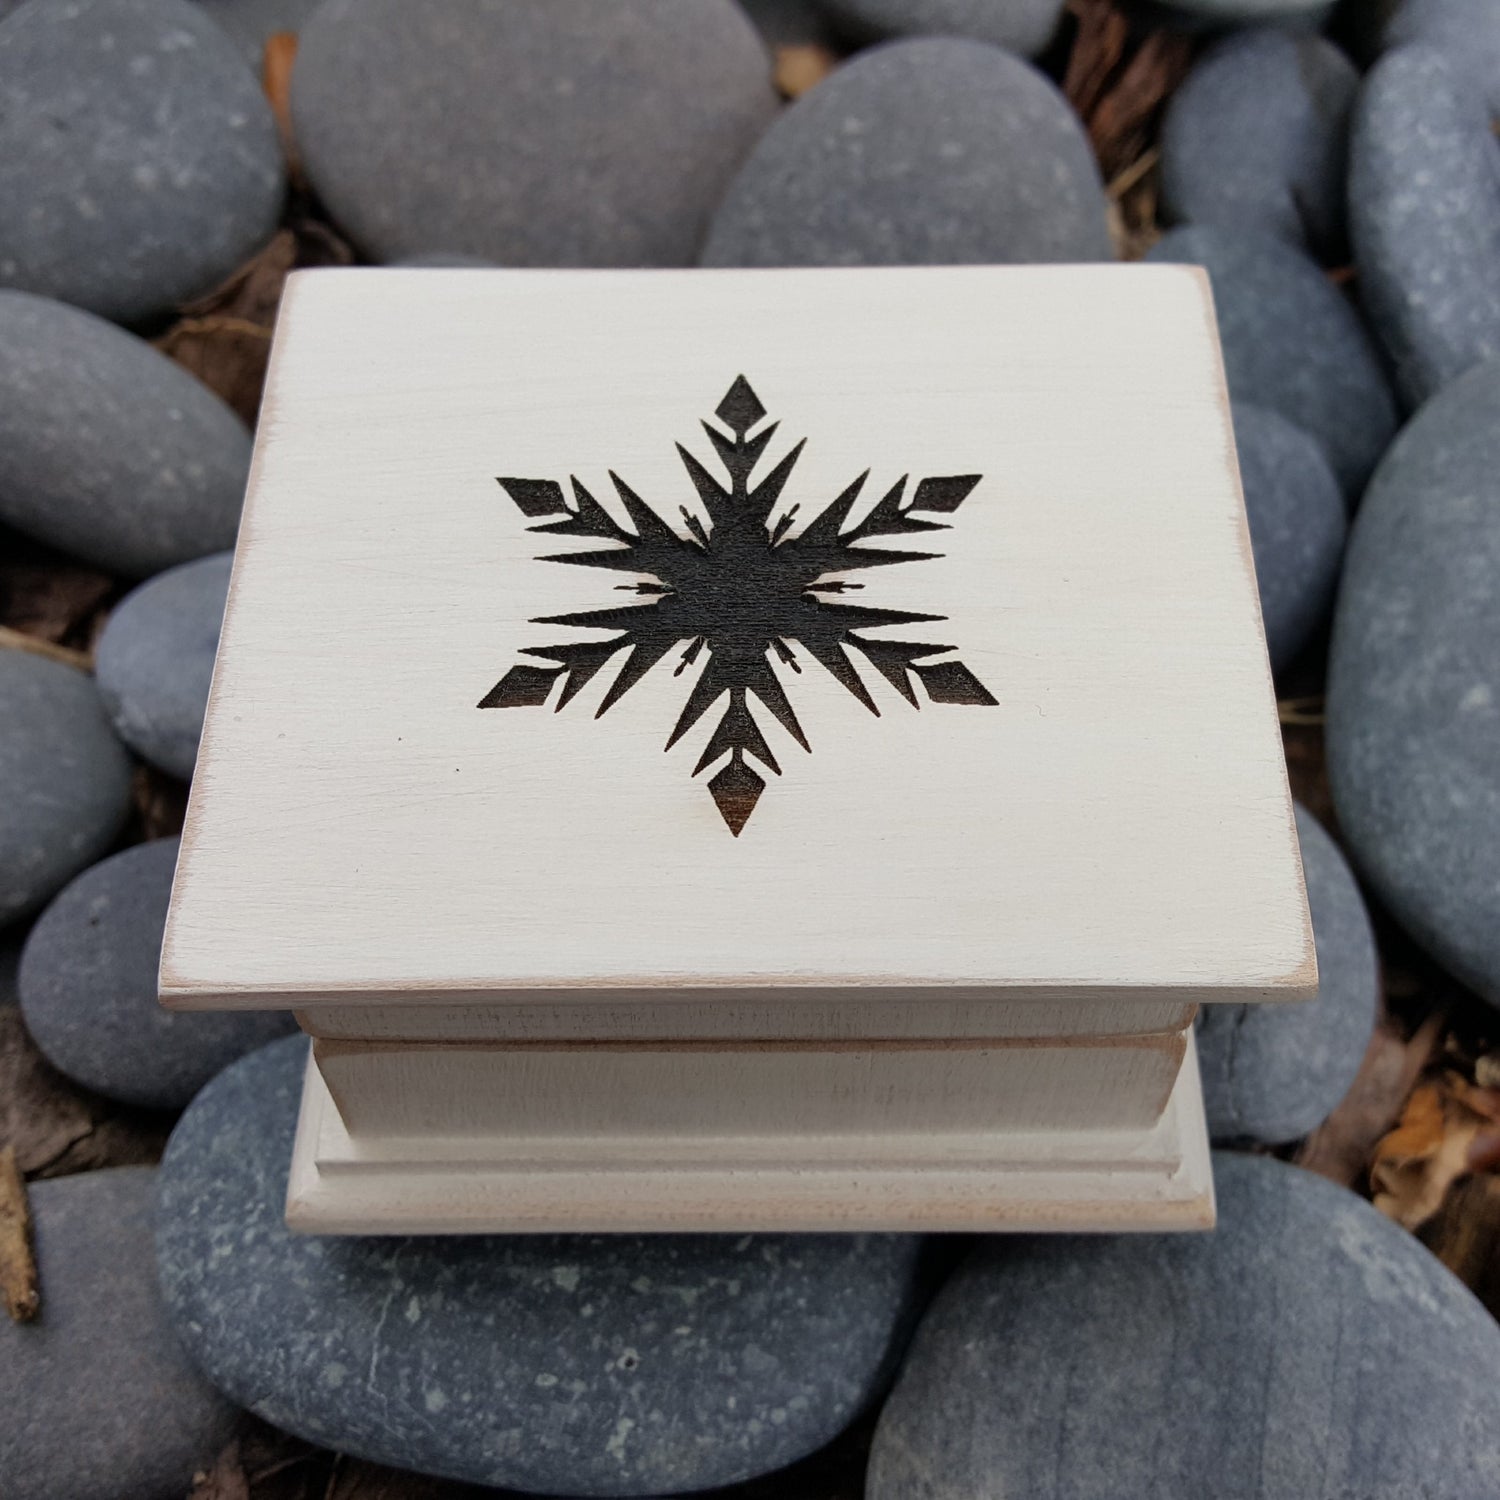 Snowflake music box custom-made with your choice of song and color